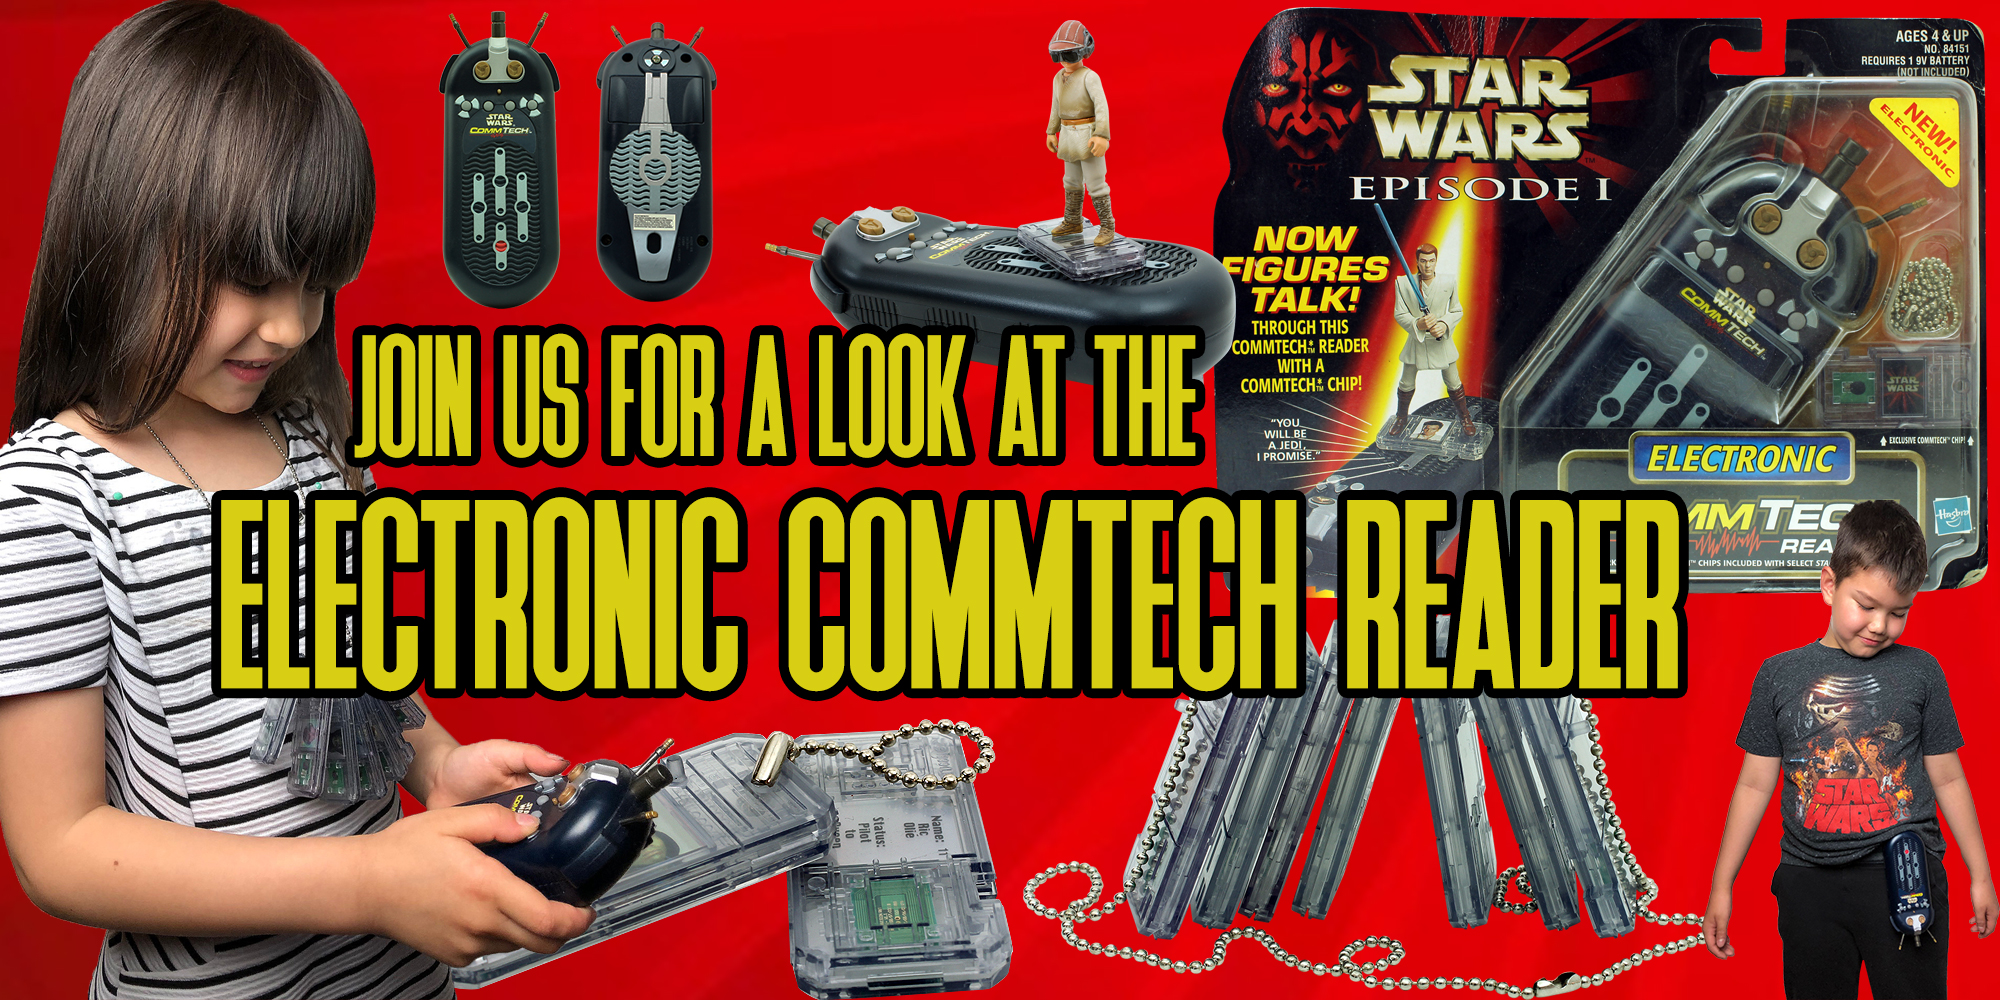 TPM 20th Anniversary:  The Electronic CommTech Reader